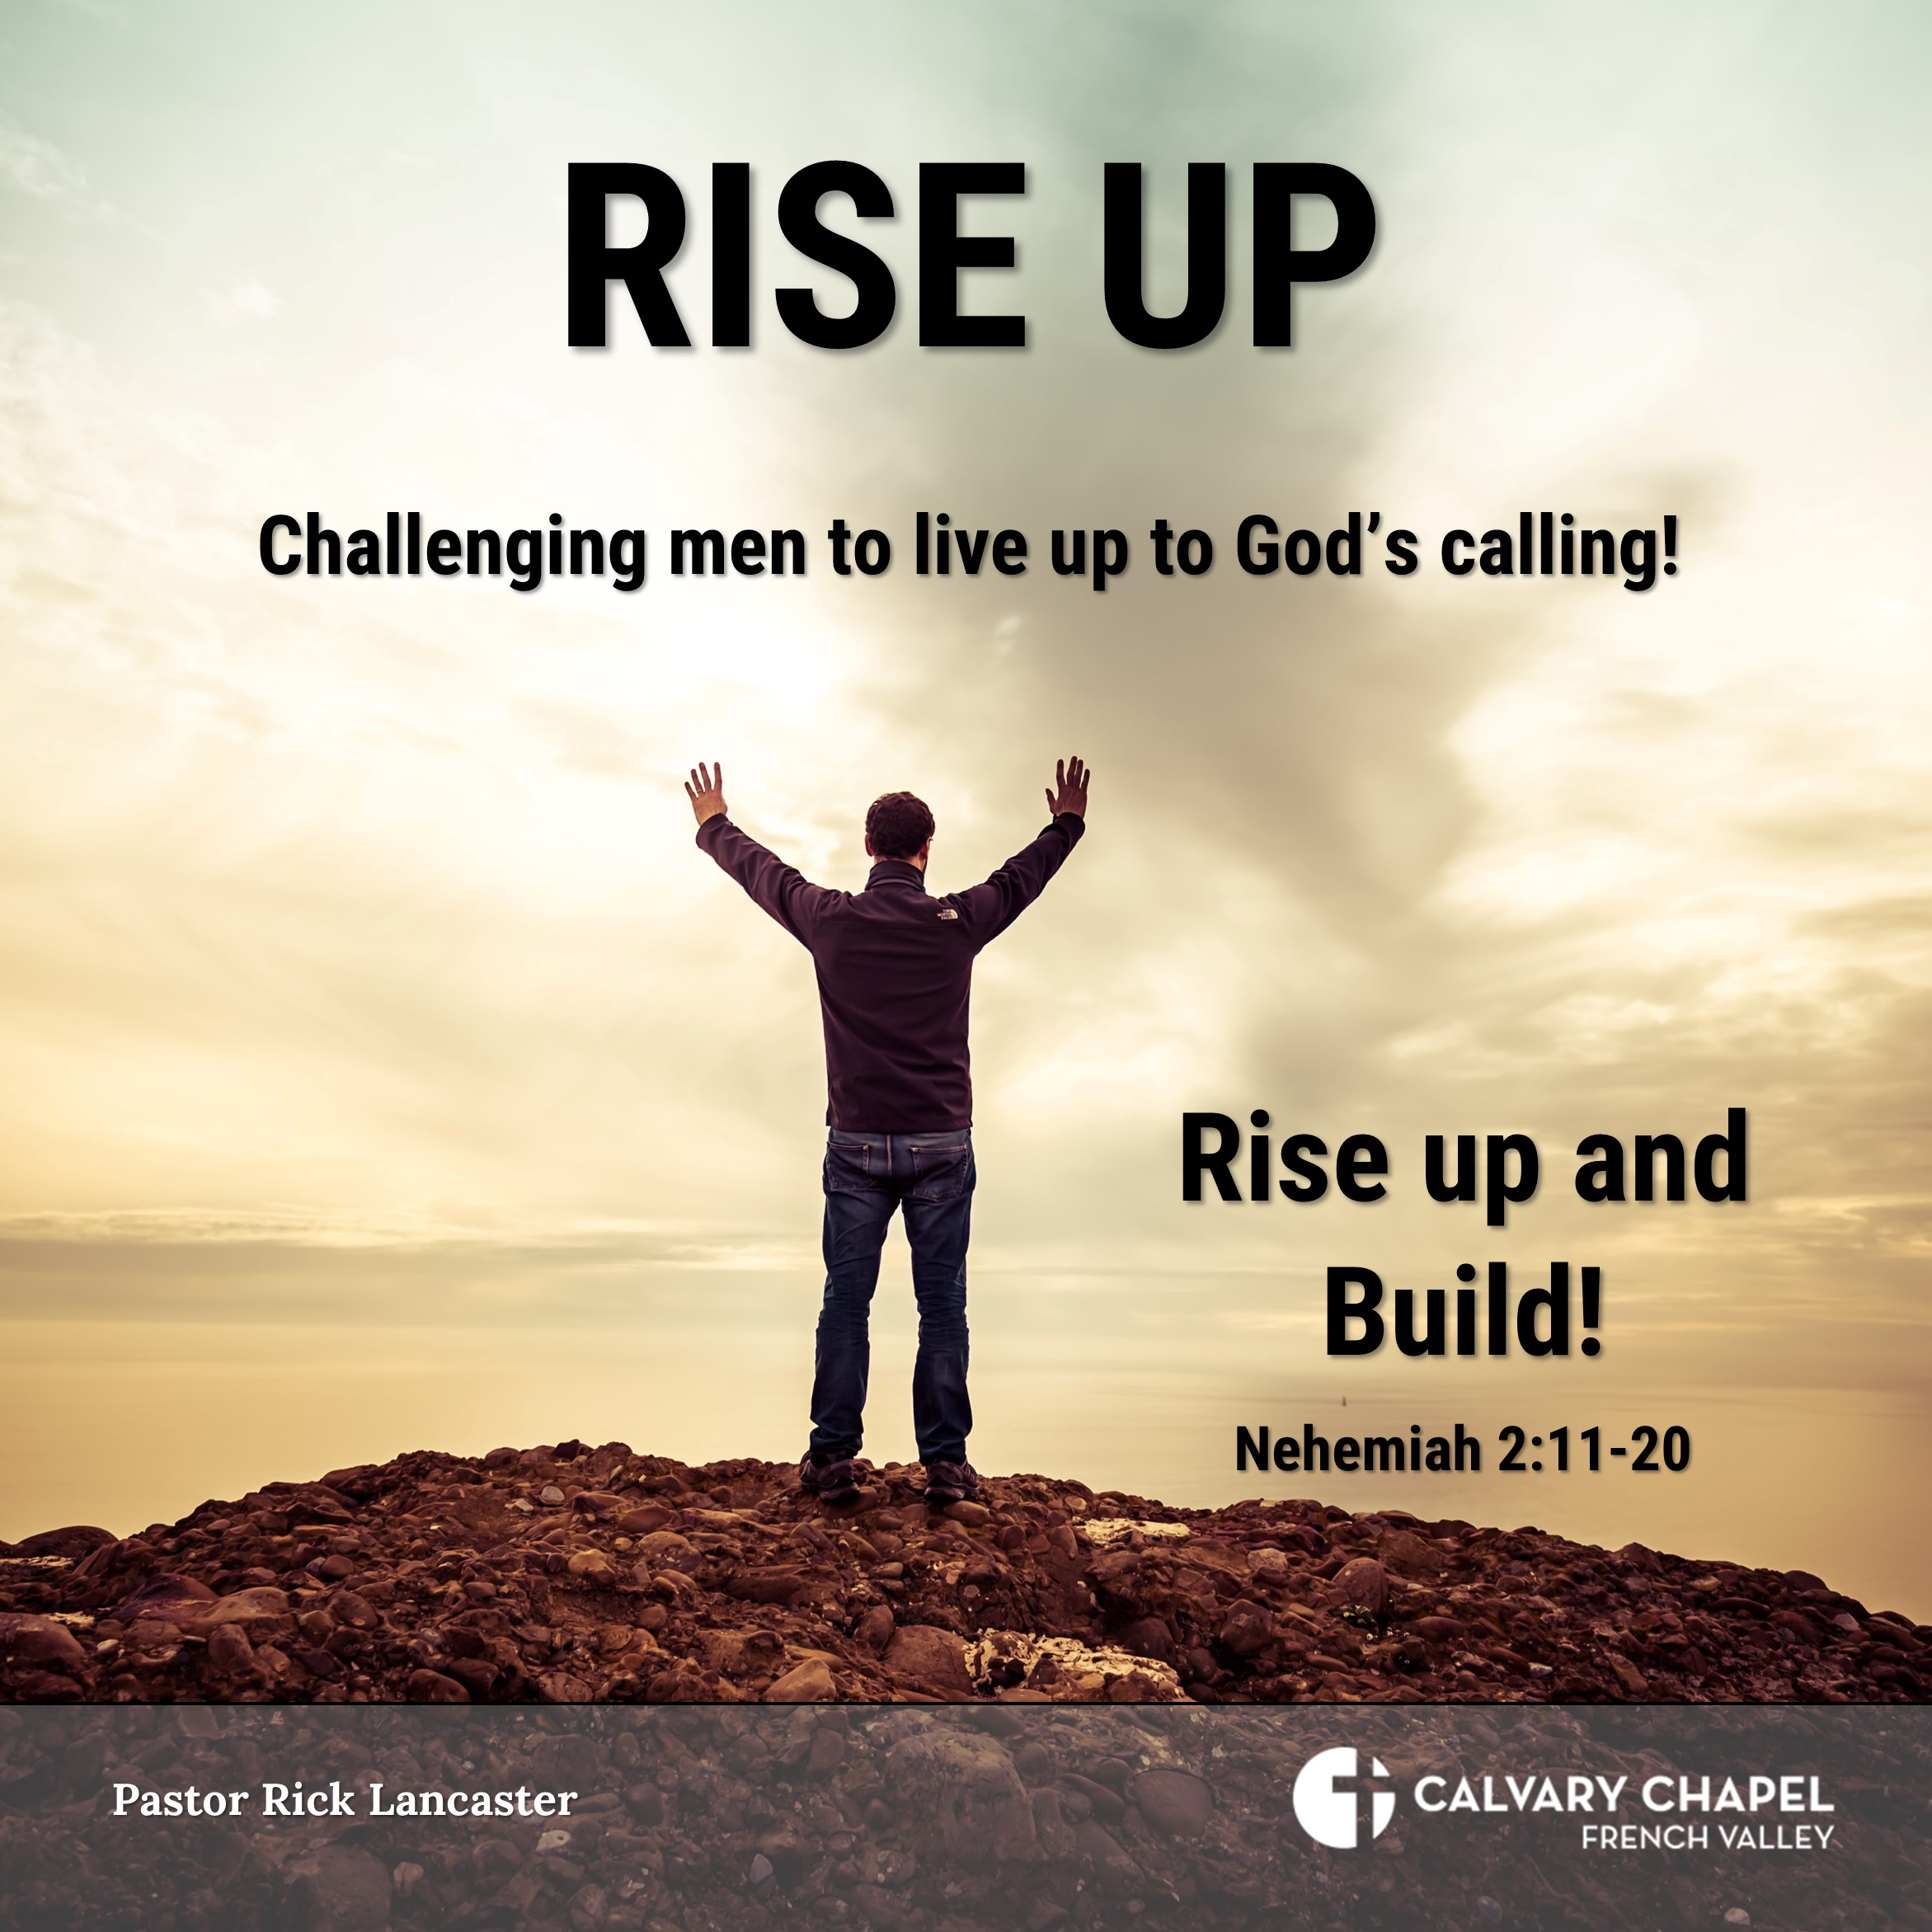 Rise up and build! Nehemiah 2:11-20 - Men's Breakfast  - September 16, 2023 - RISE UP: Challenging men to live up to God’s calling!